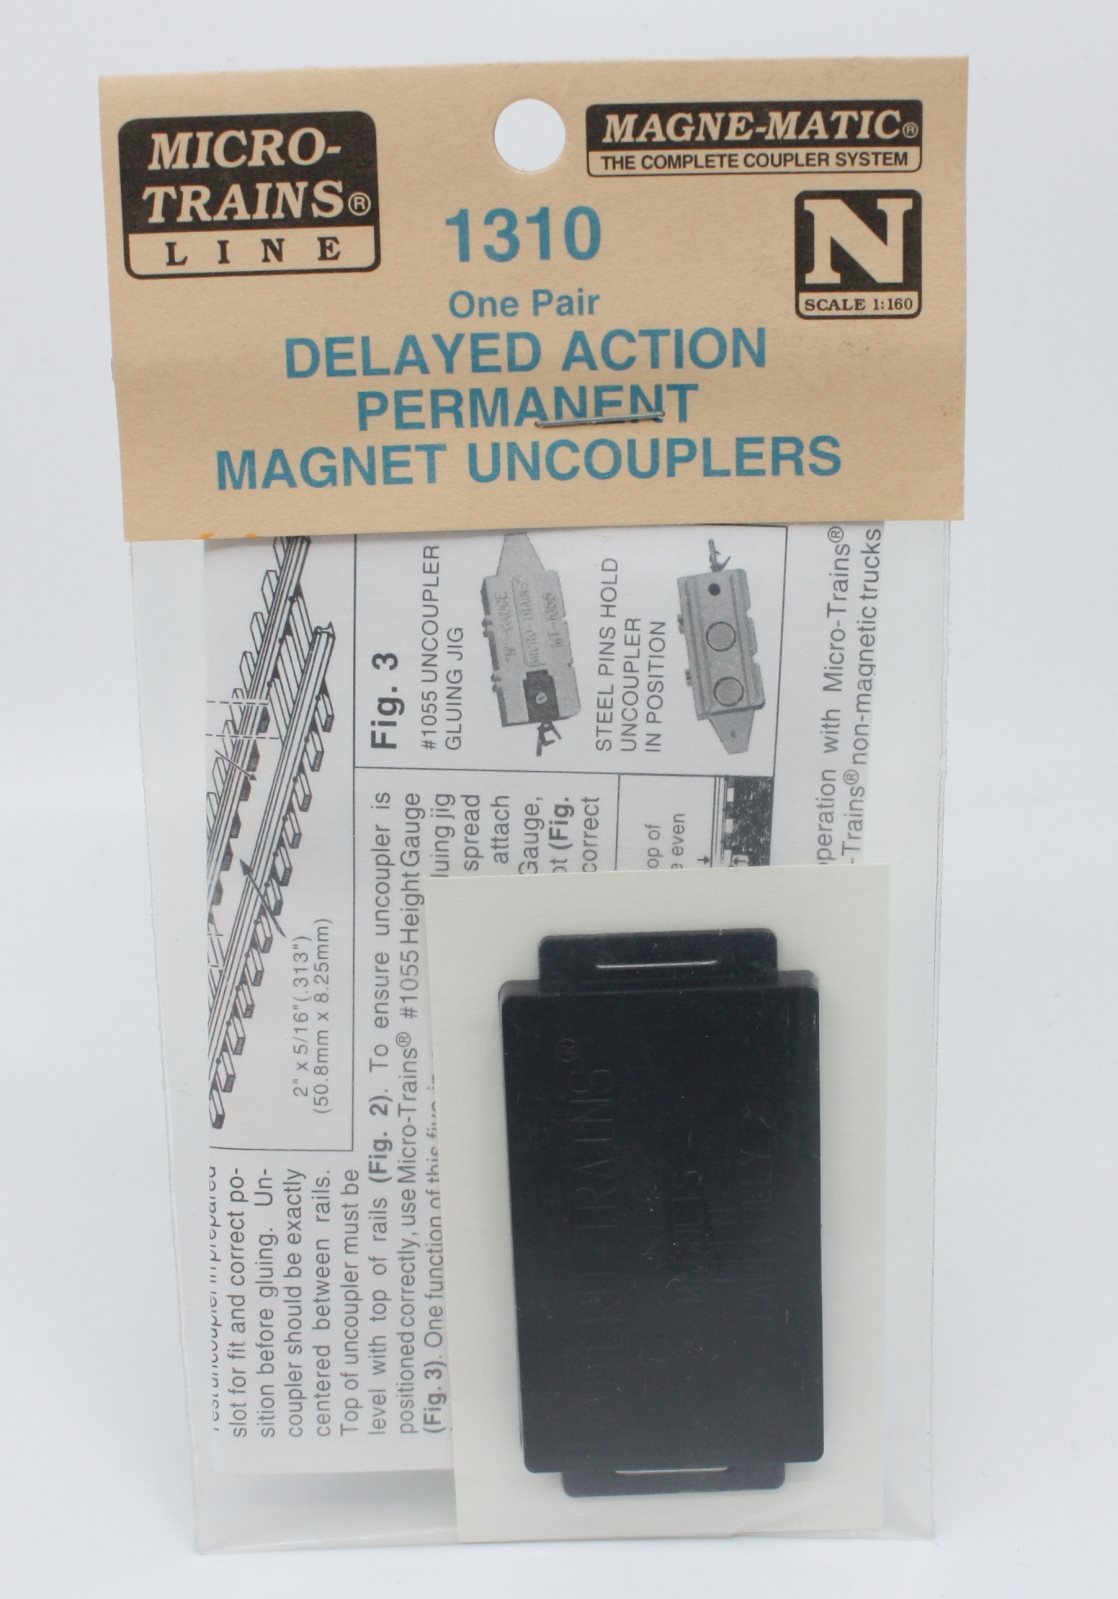 Micro-Trains 98800172 N Delayed Action Permanent Magnet Uncouplers